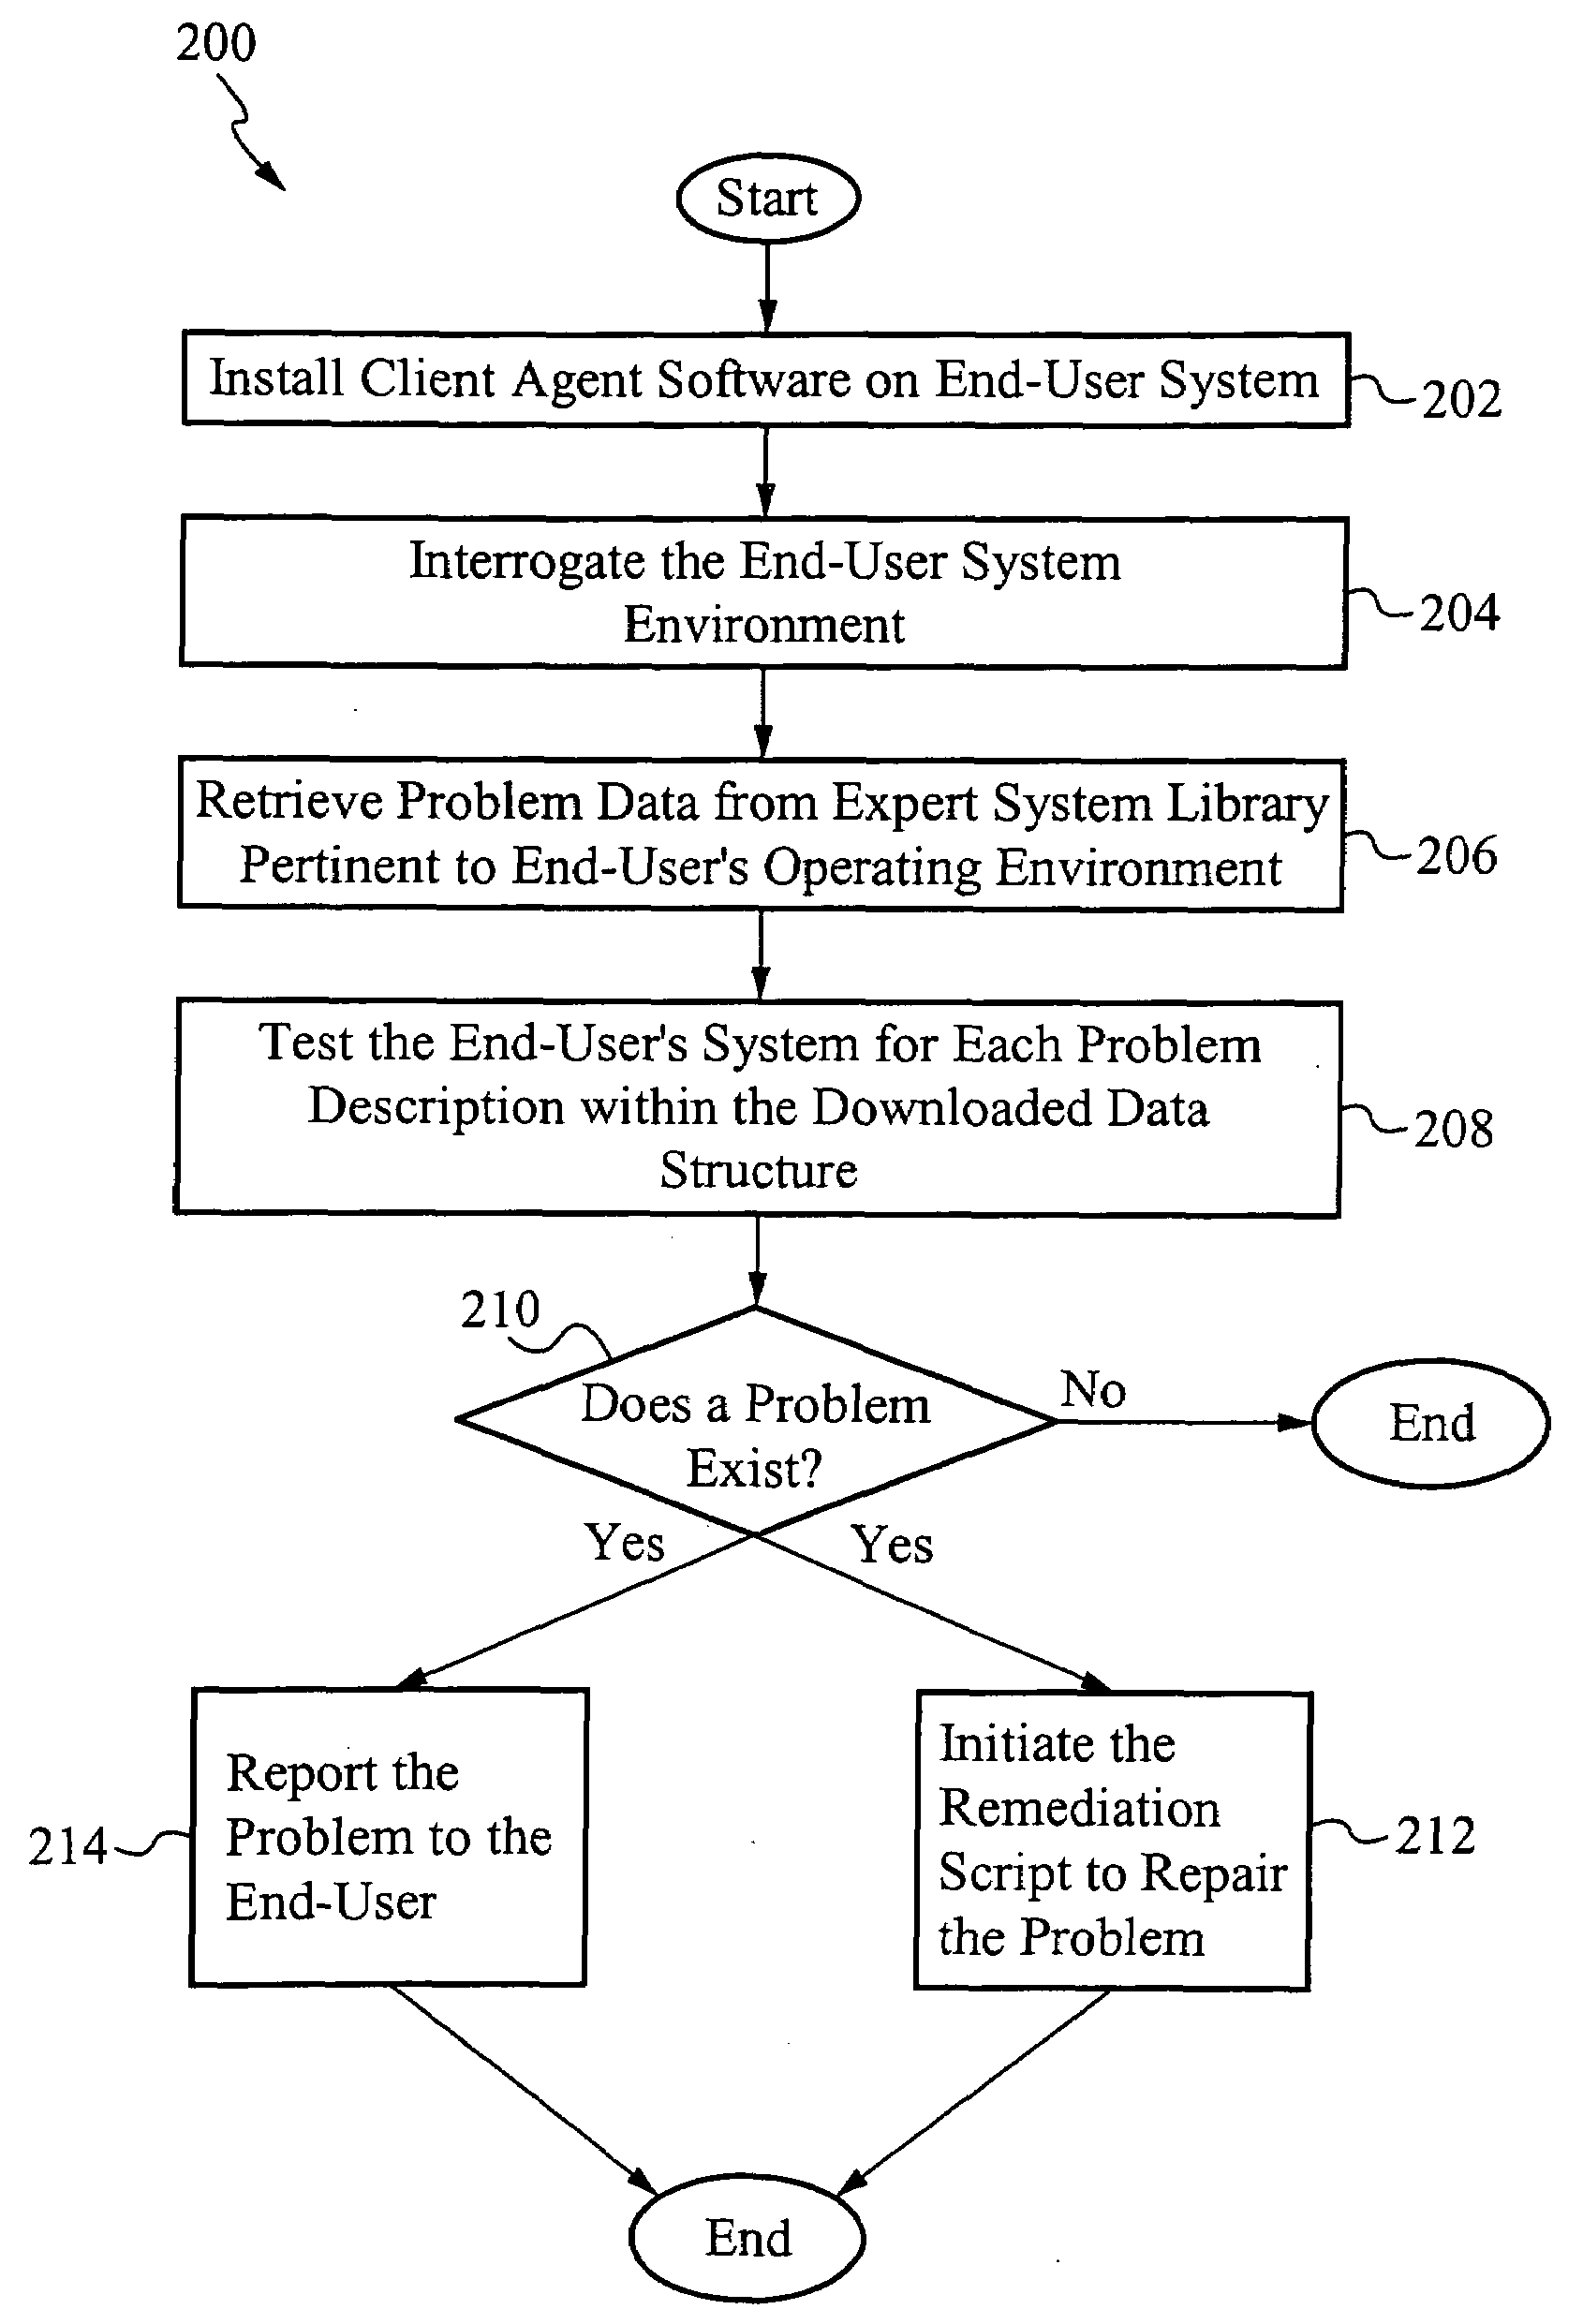 Computer hardware and software diagnostic and report system incorporating an expert system and agents